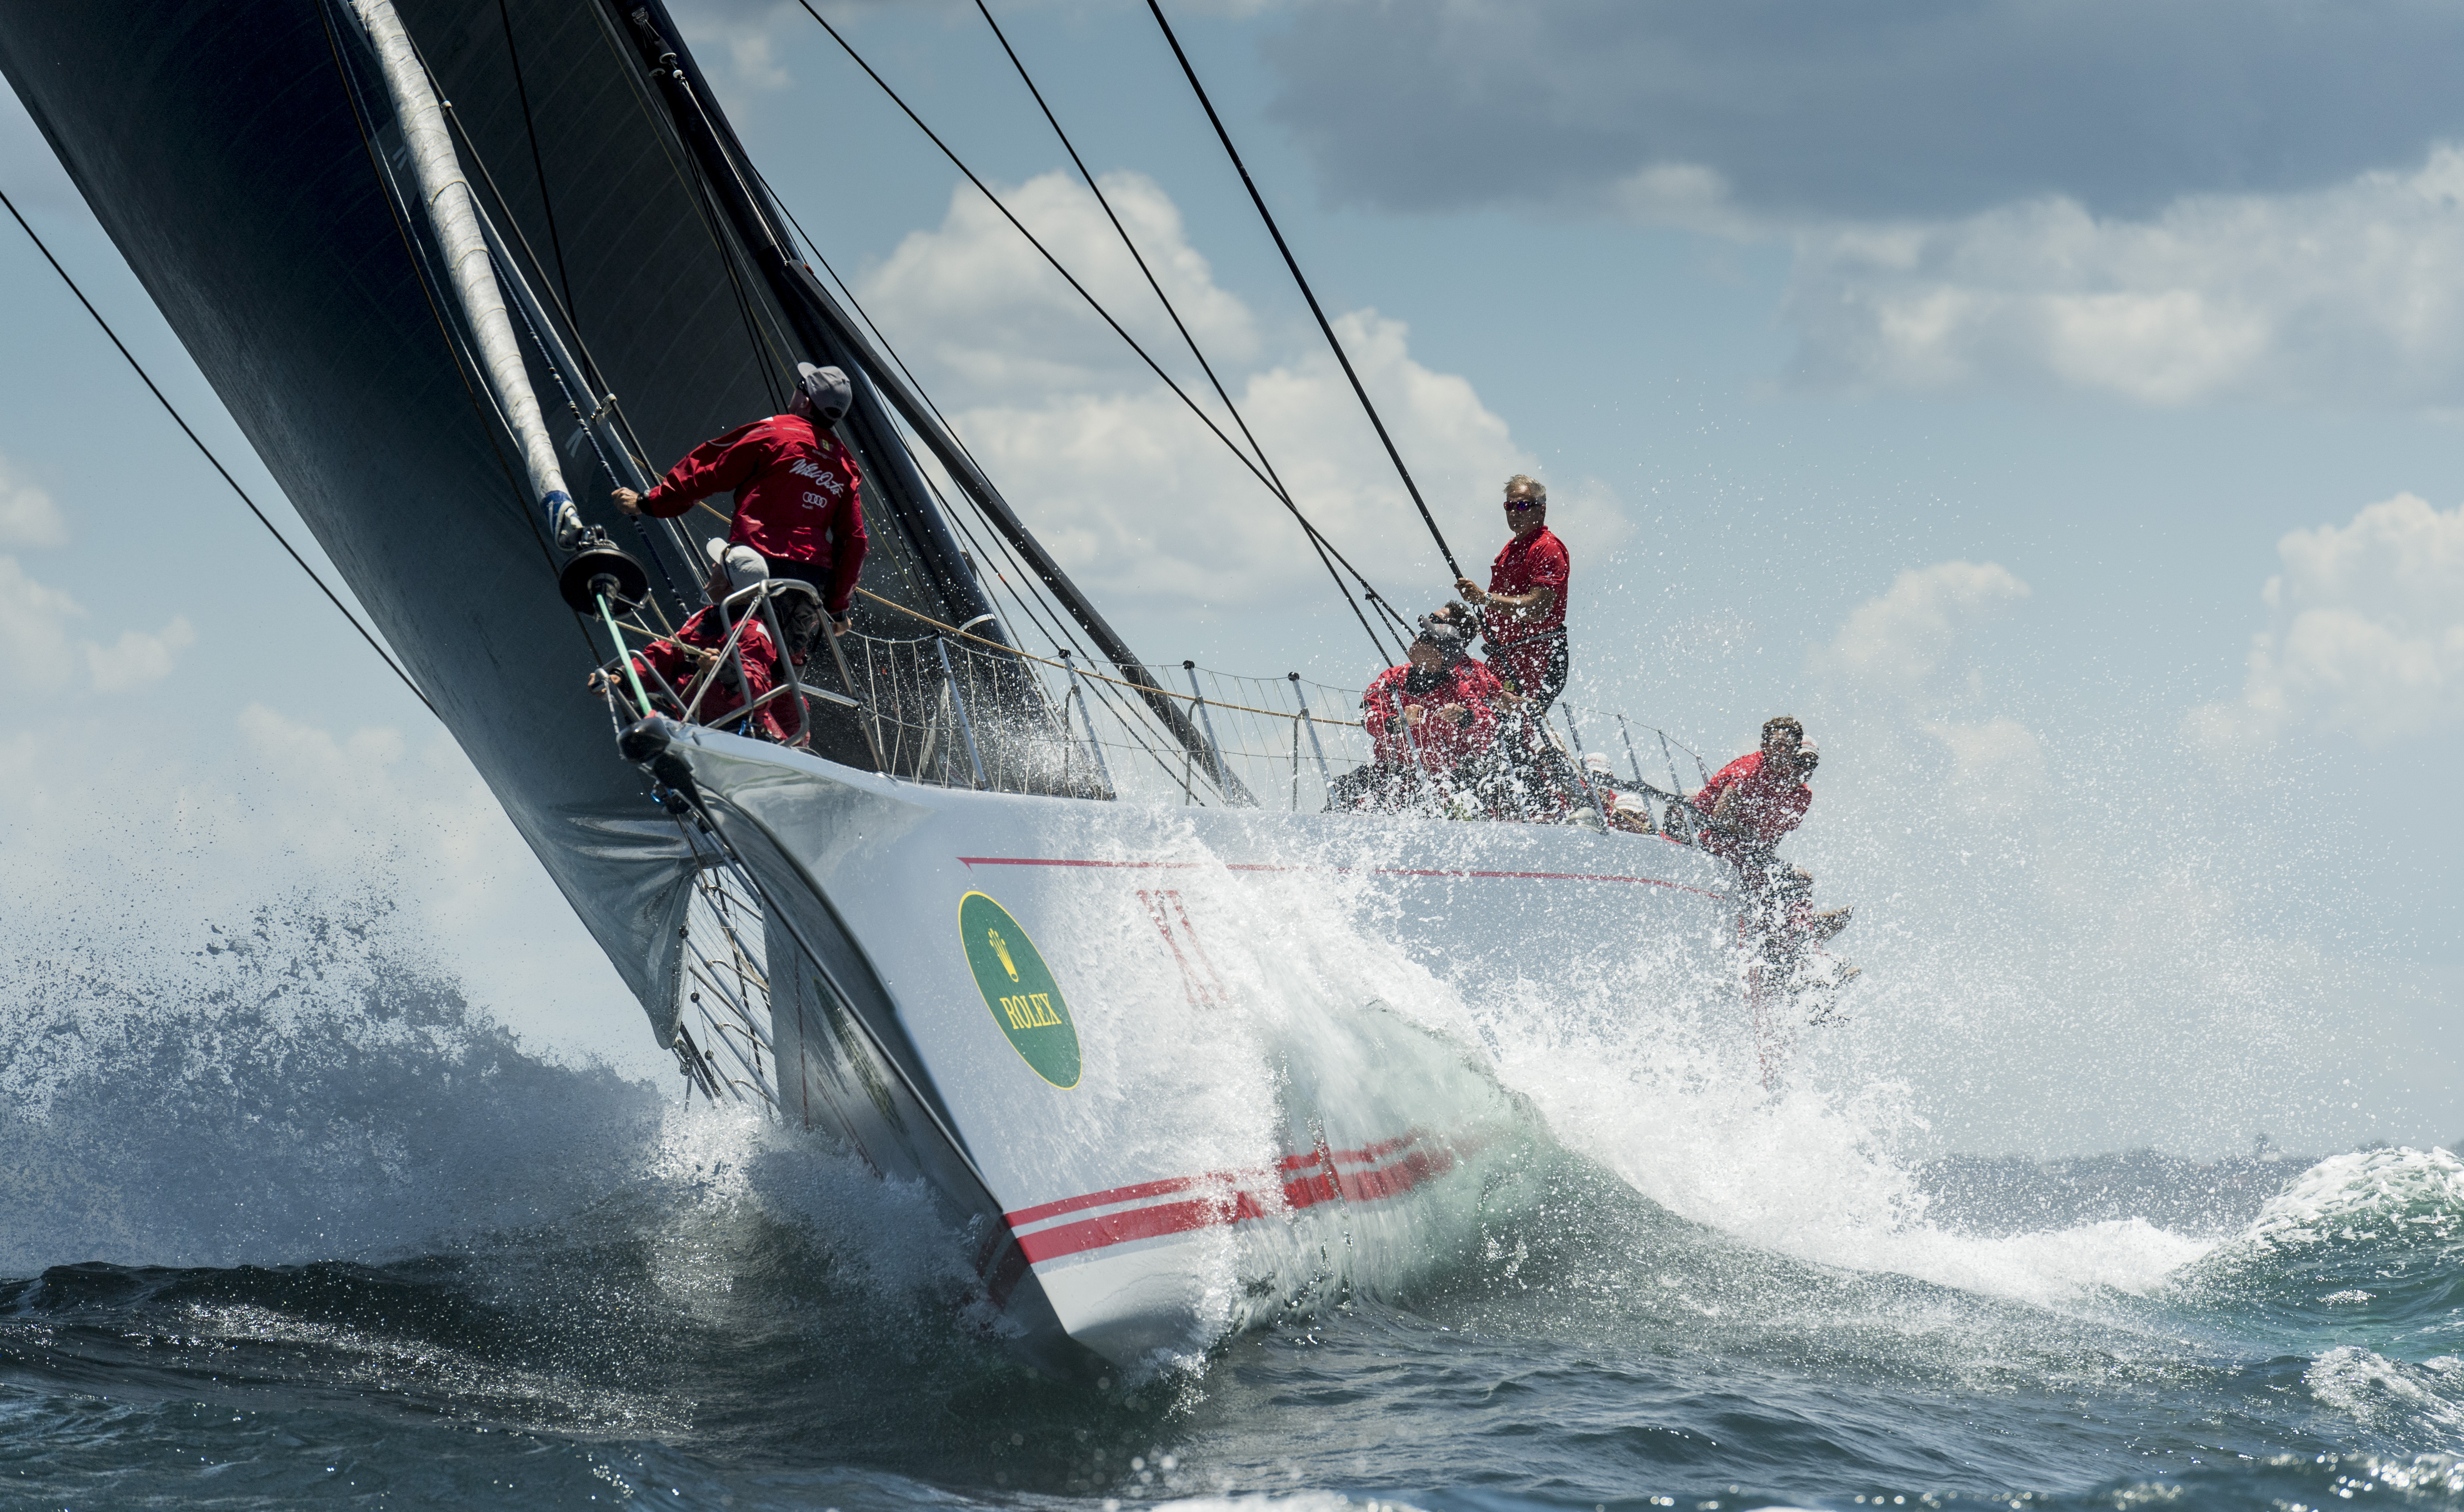 WILD OATS XI was leading the Rolex Sydney Hobart fleet until a keel issue forced her retirement